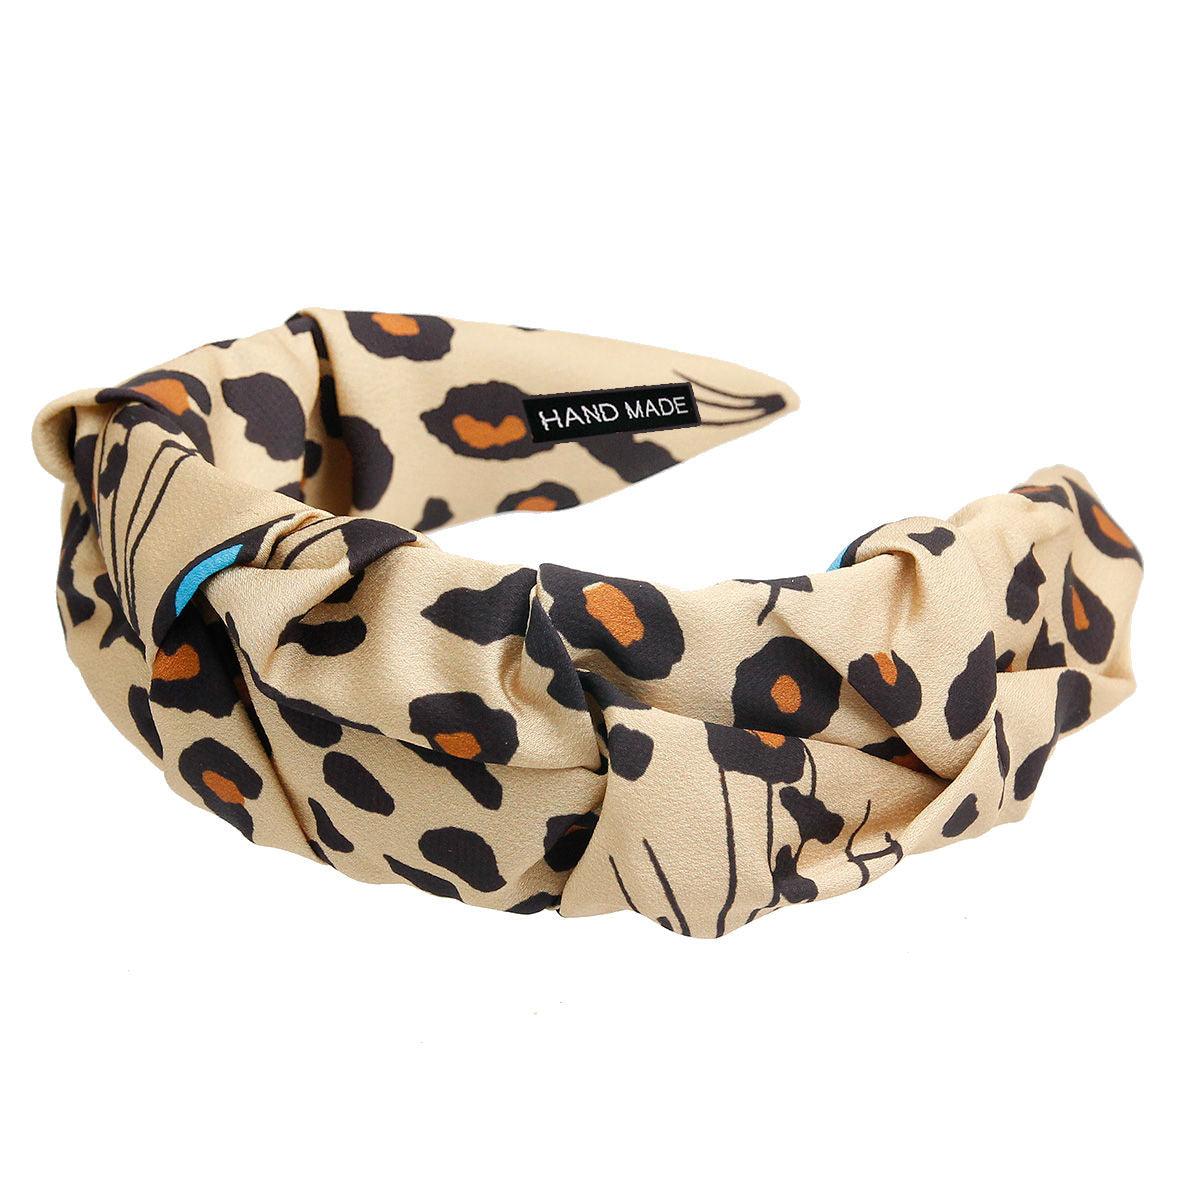 Get your wild on with Leopard Print Headband - Shop Now